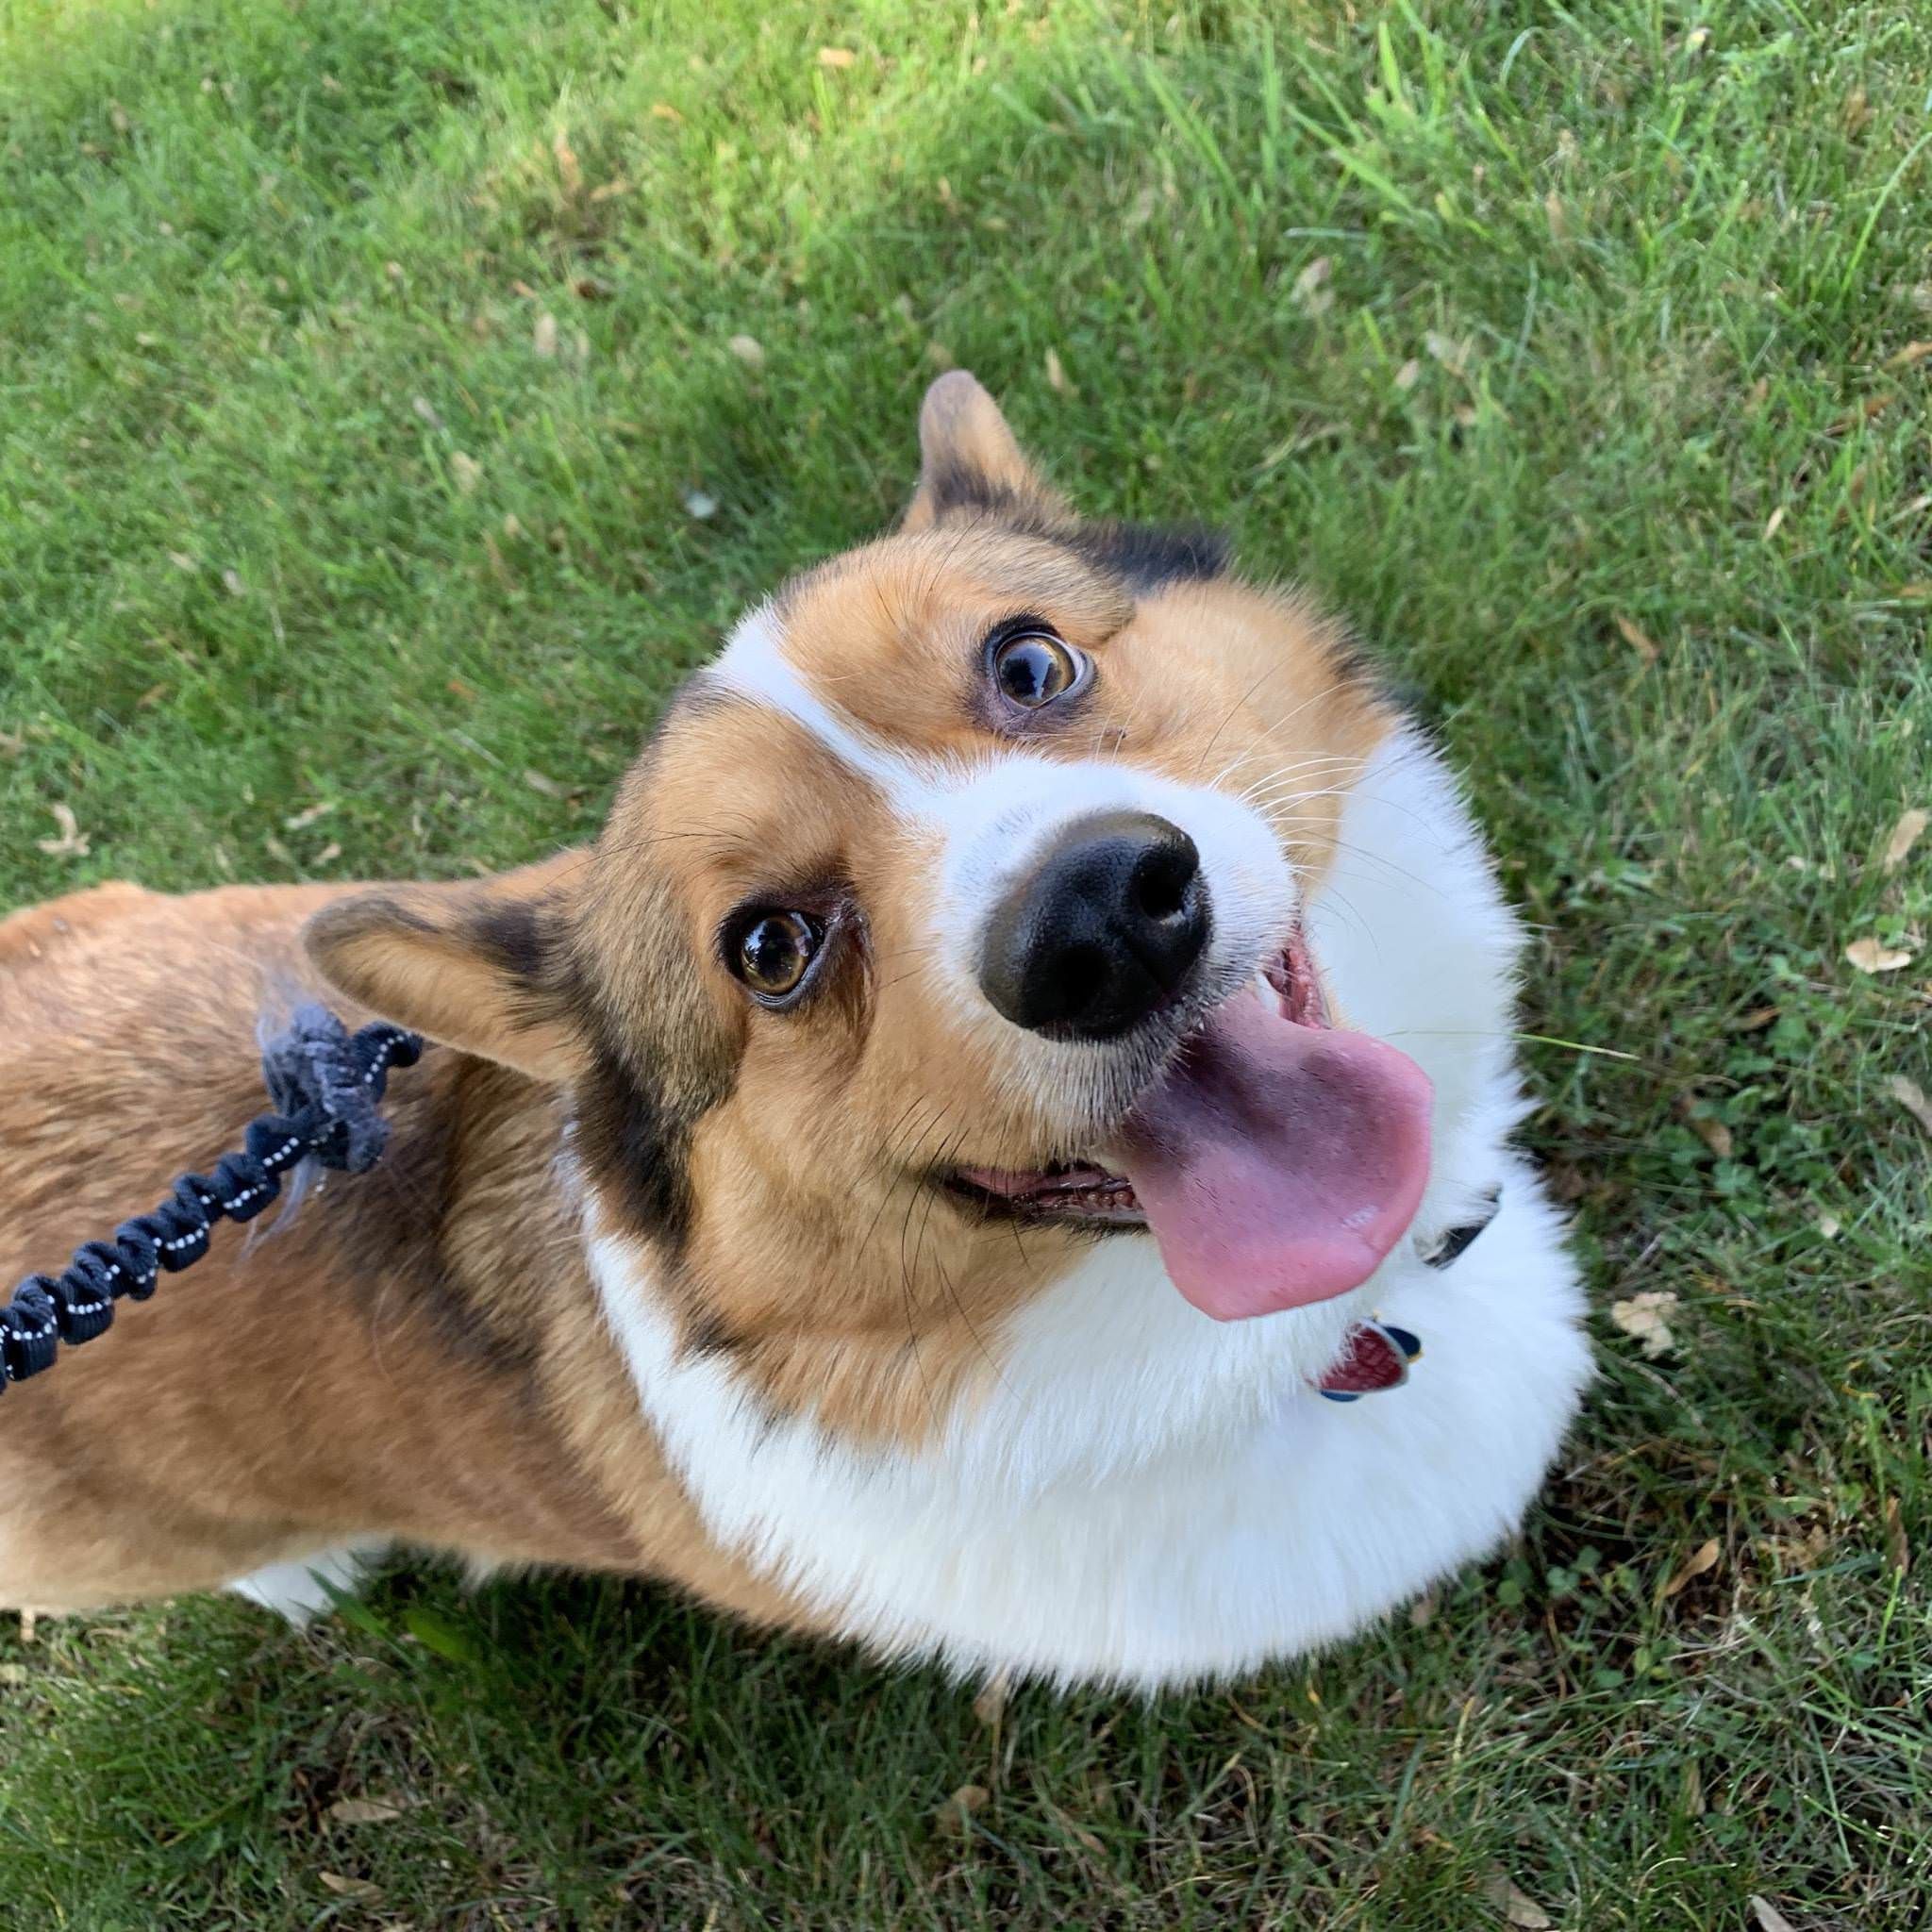 Here's a very aesthetic photo of Finn out on his walk today. Corgi, Baby animals, Corgi wallpaper